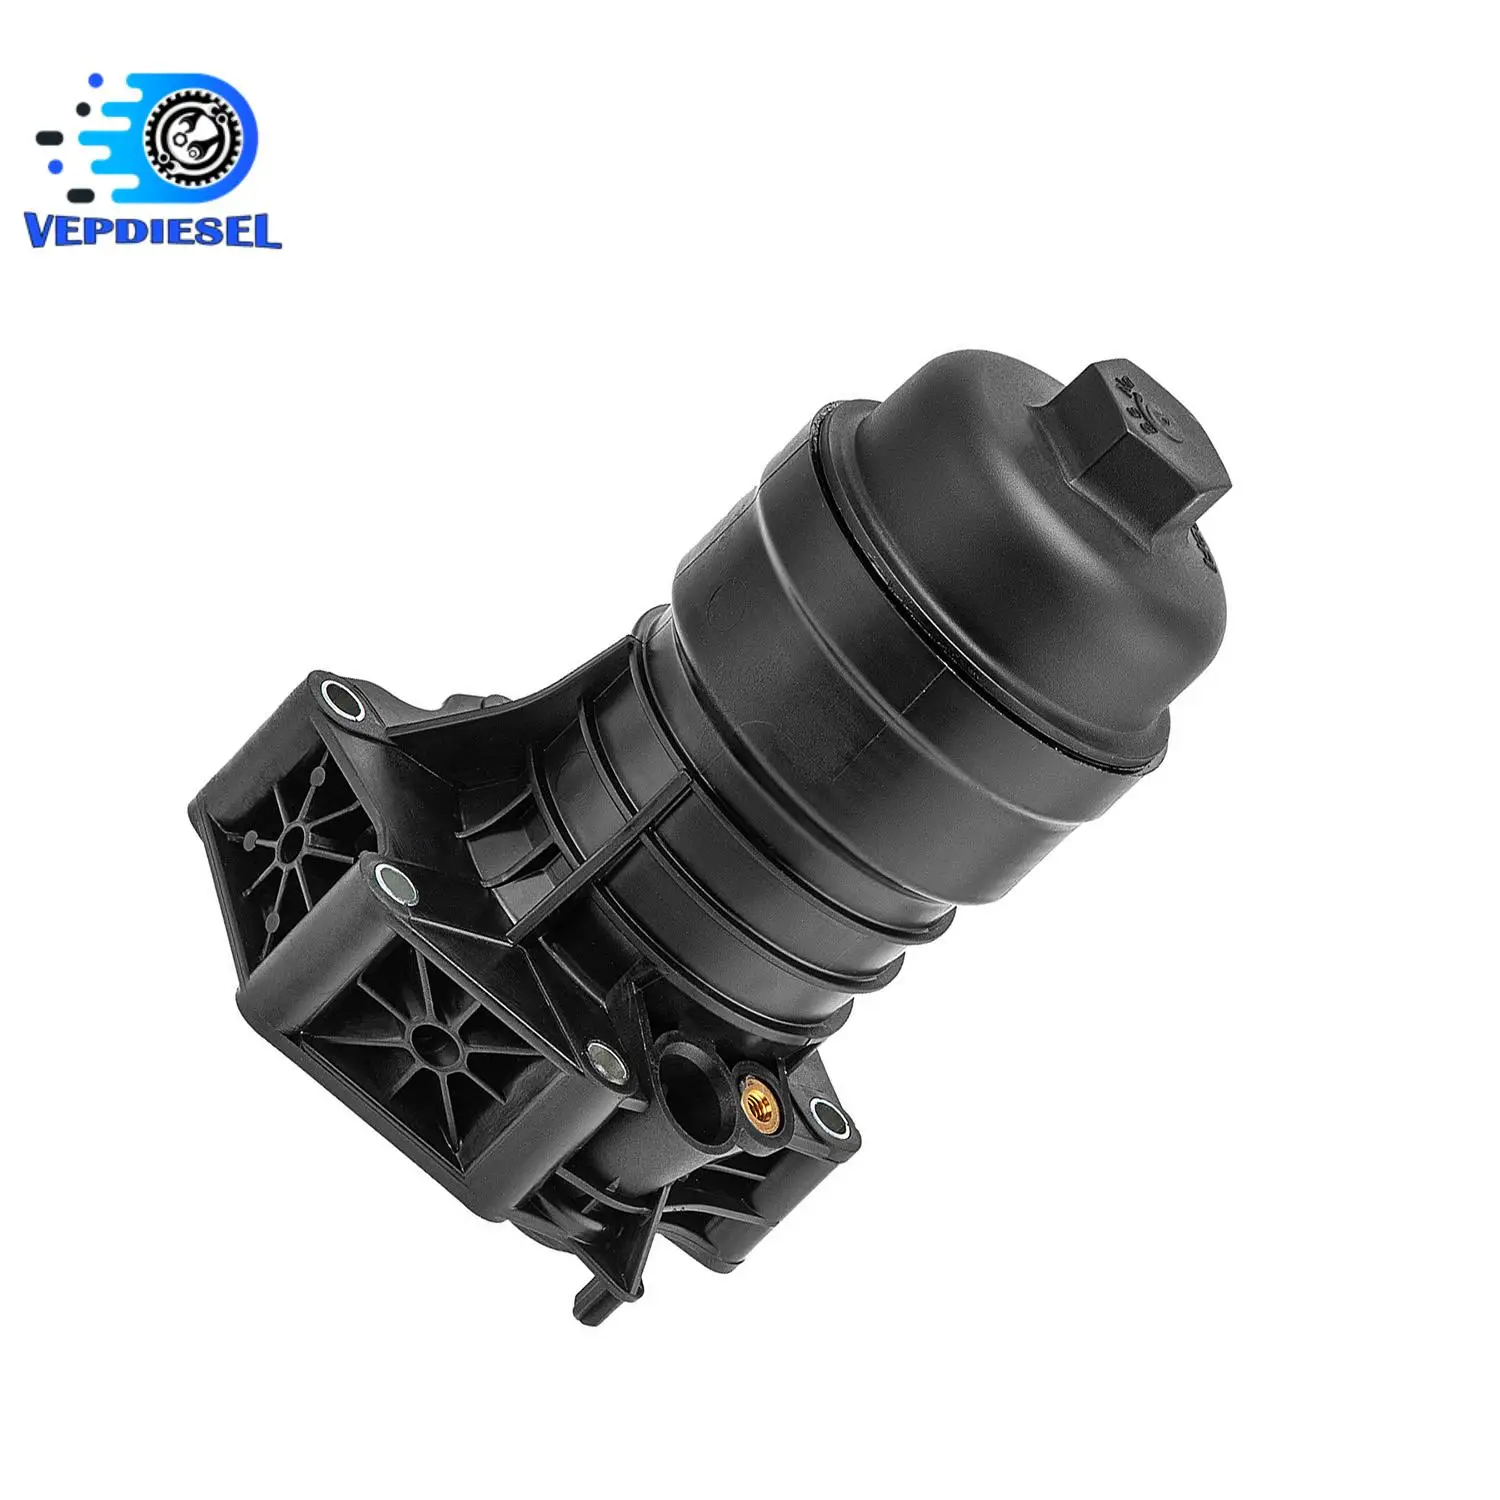 

1pc Engine Oil Filter Housing For Audi A4 A5 A6 A7 A8 Q5 Q7 Q8 VW Touareg 06M115401L 06M115401K 06M115401E 06M115401F Car Parts